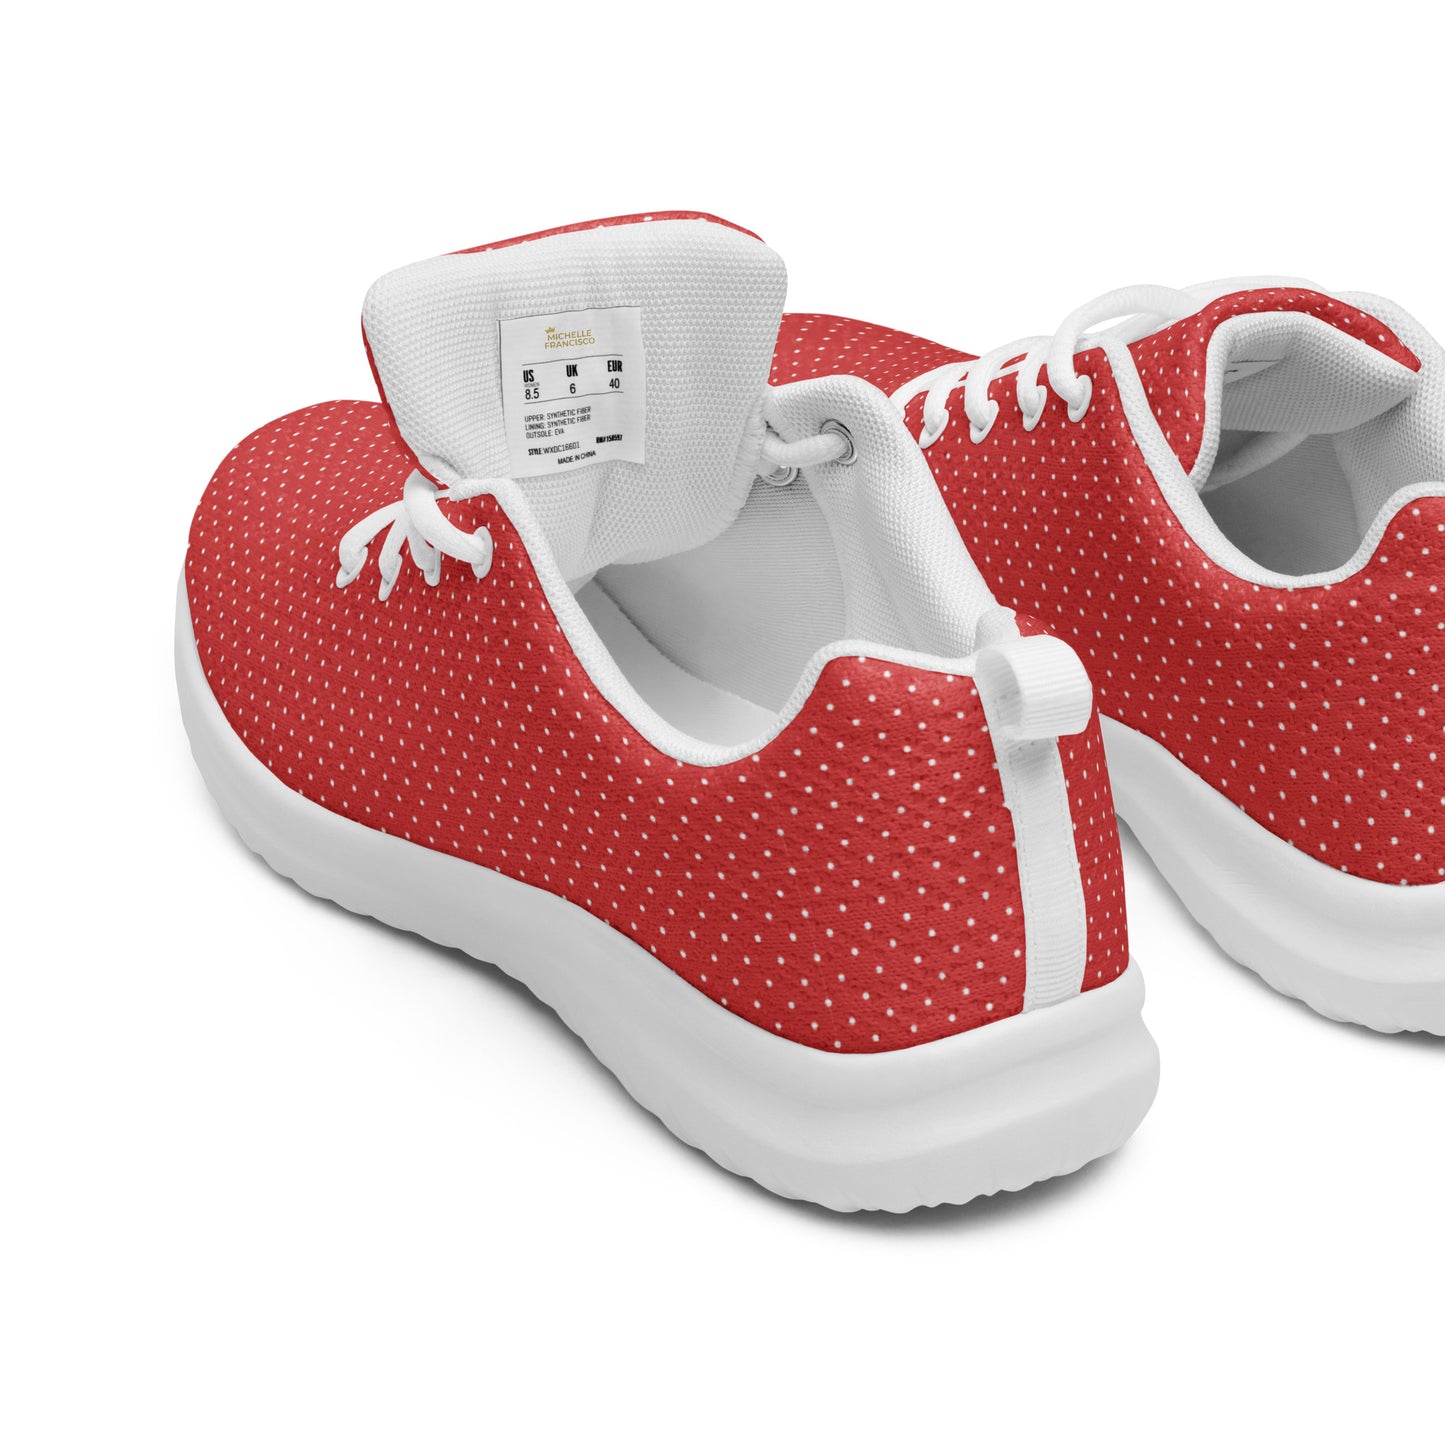 Women’s Red Polka Athletic Shoes